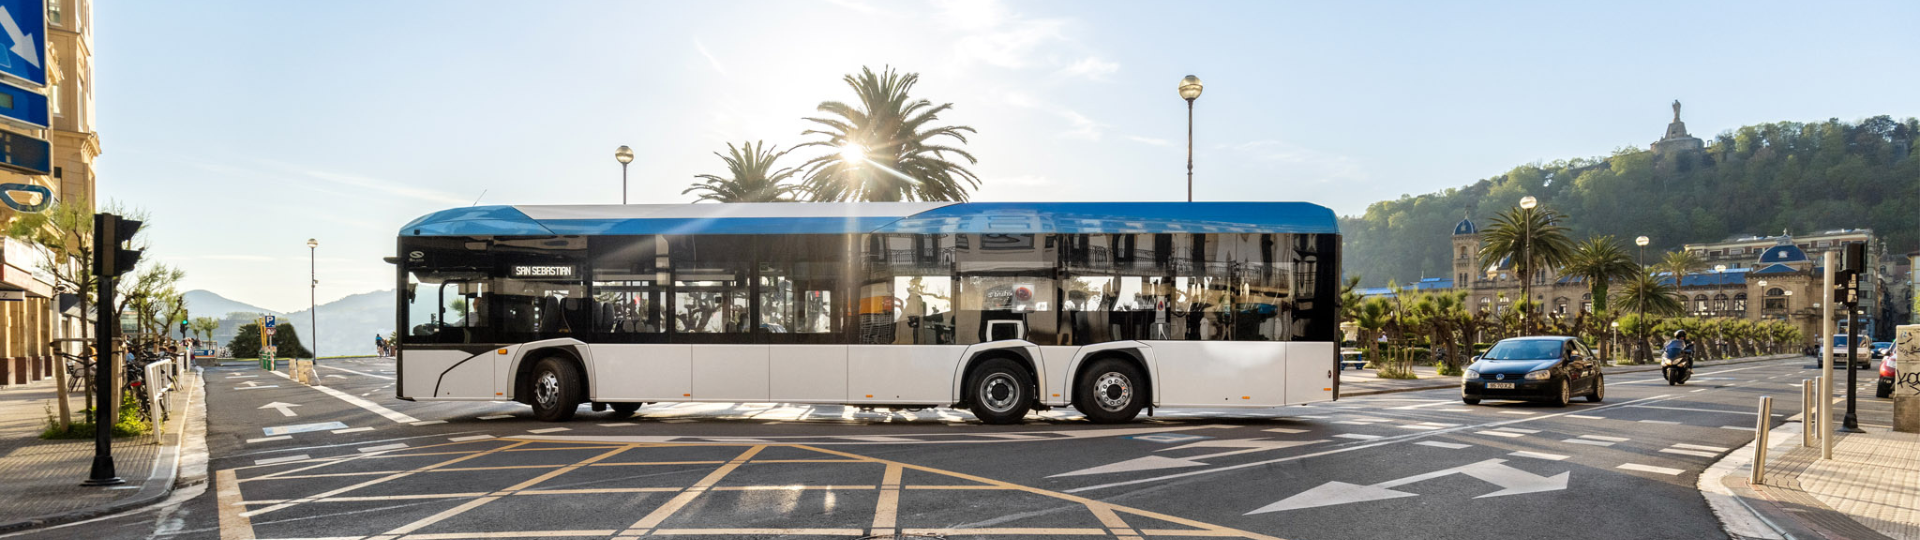 Solaris secures new contracts for 88 electric buses in Sweden